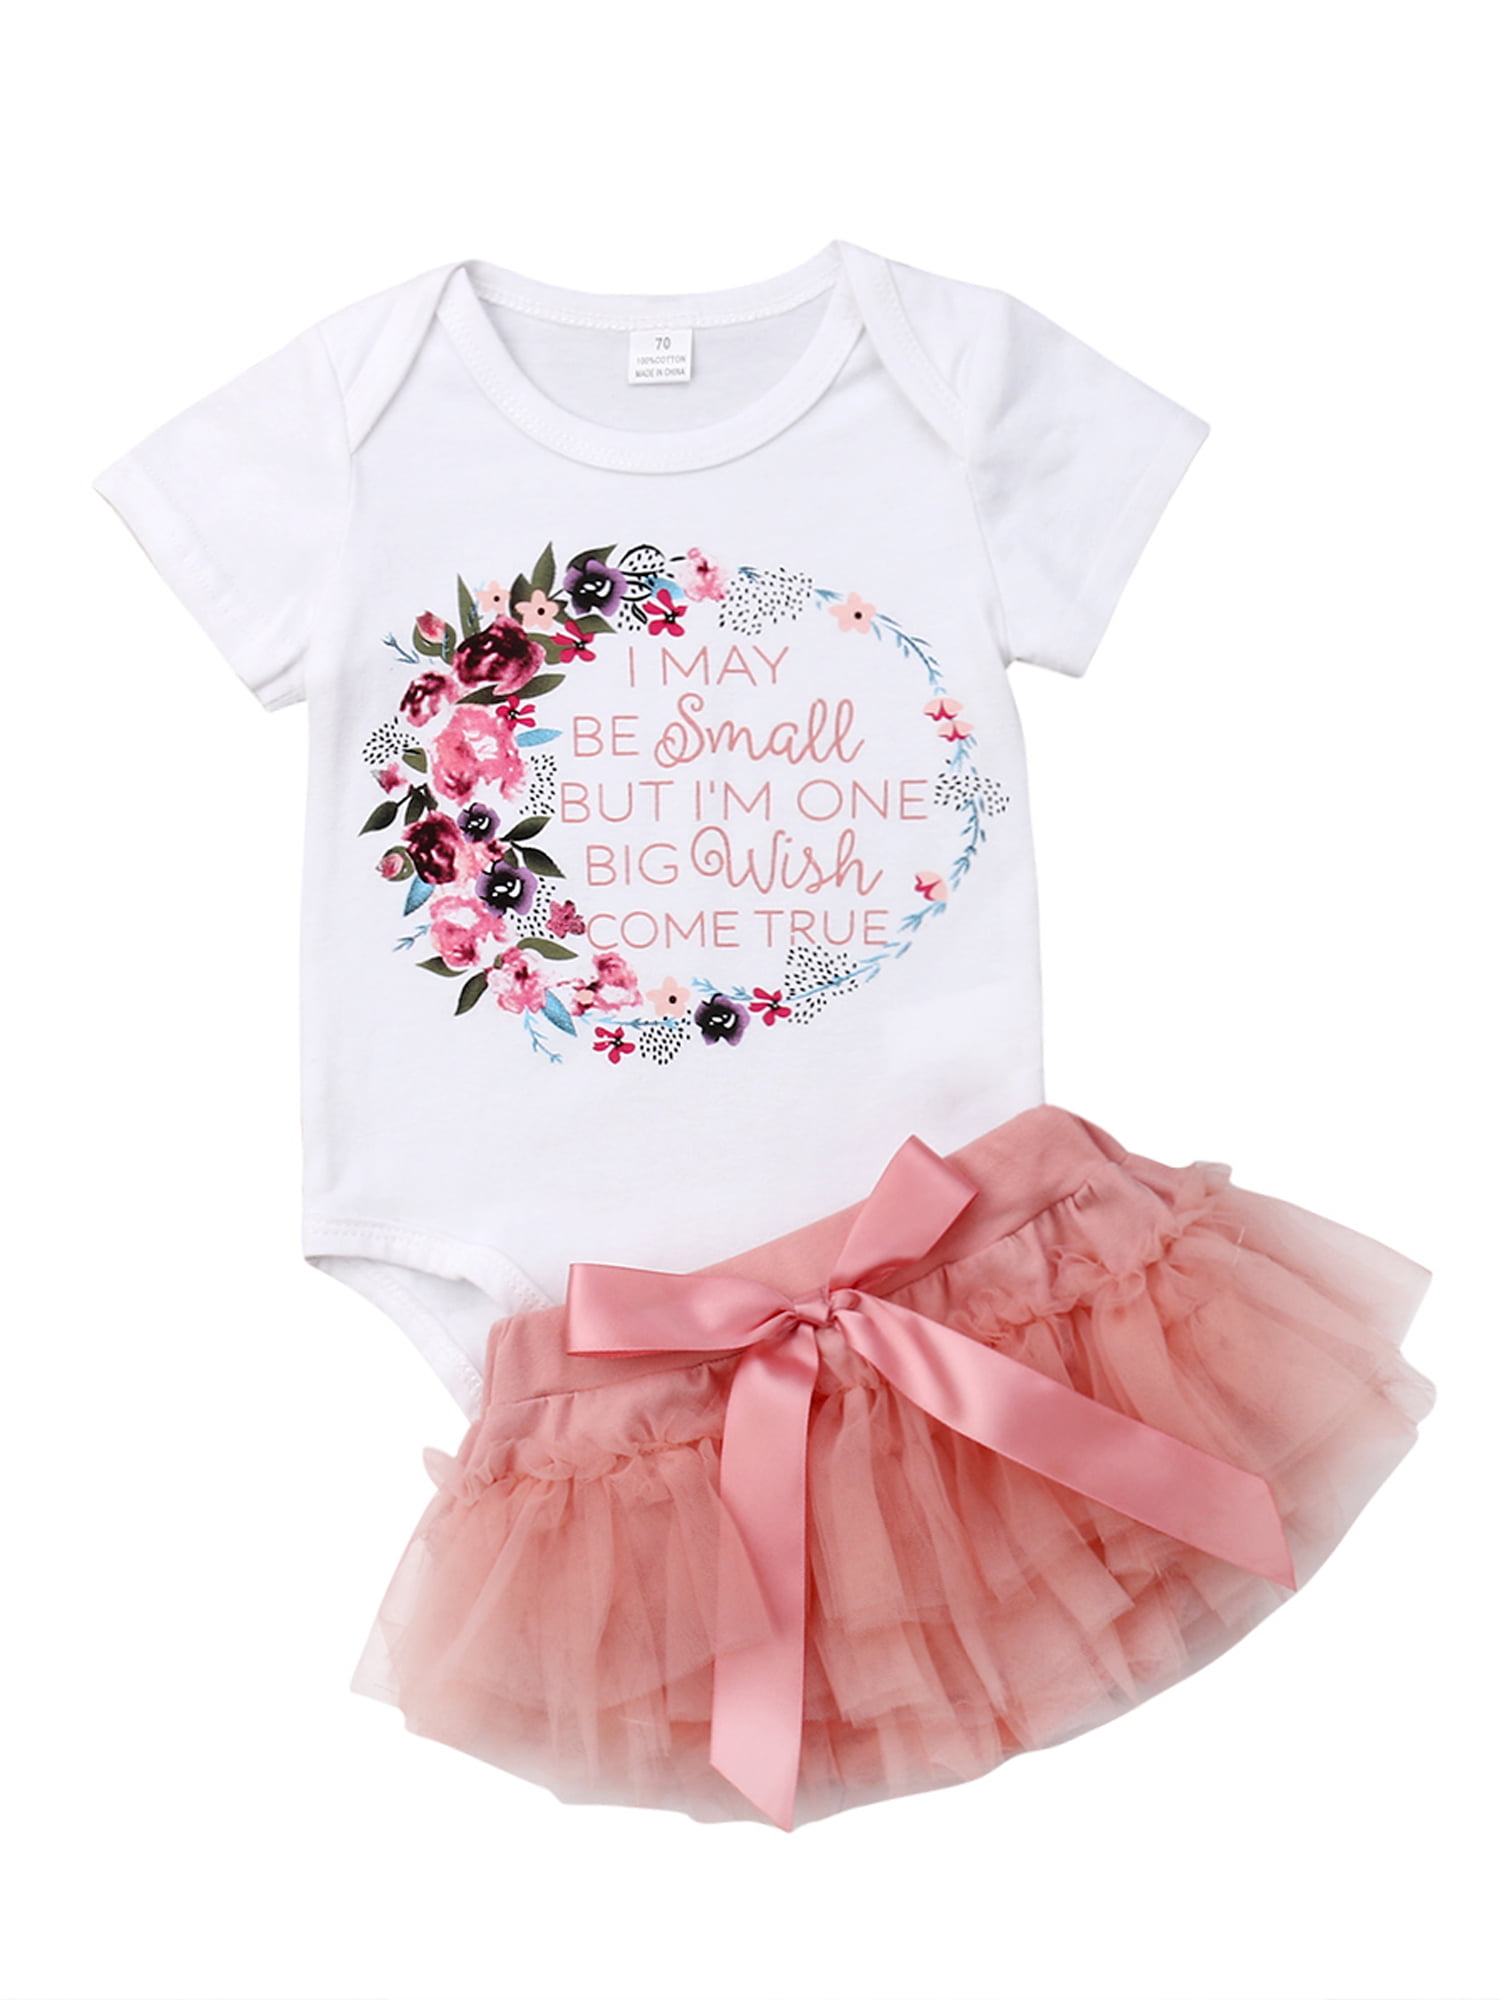 Details about   Newborn Baby Girls Birthday Outfit Dress Romper Lace Tutu Skirt Party Princess 